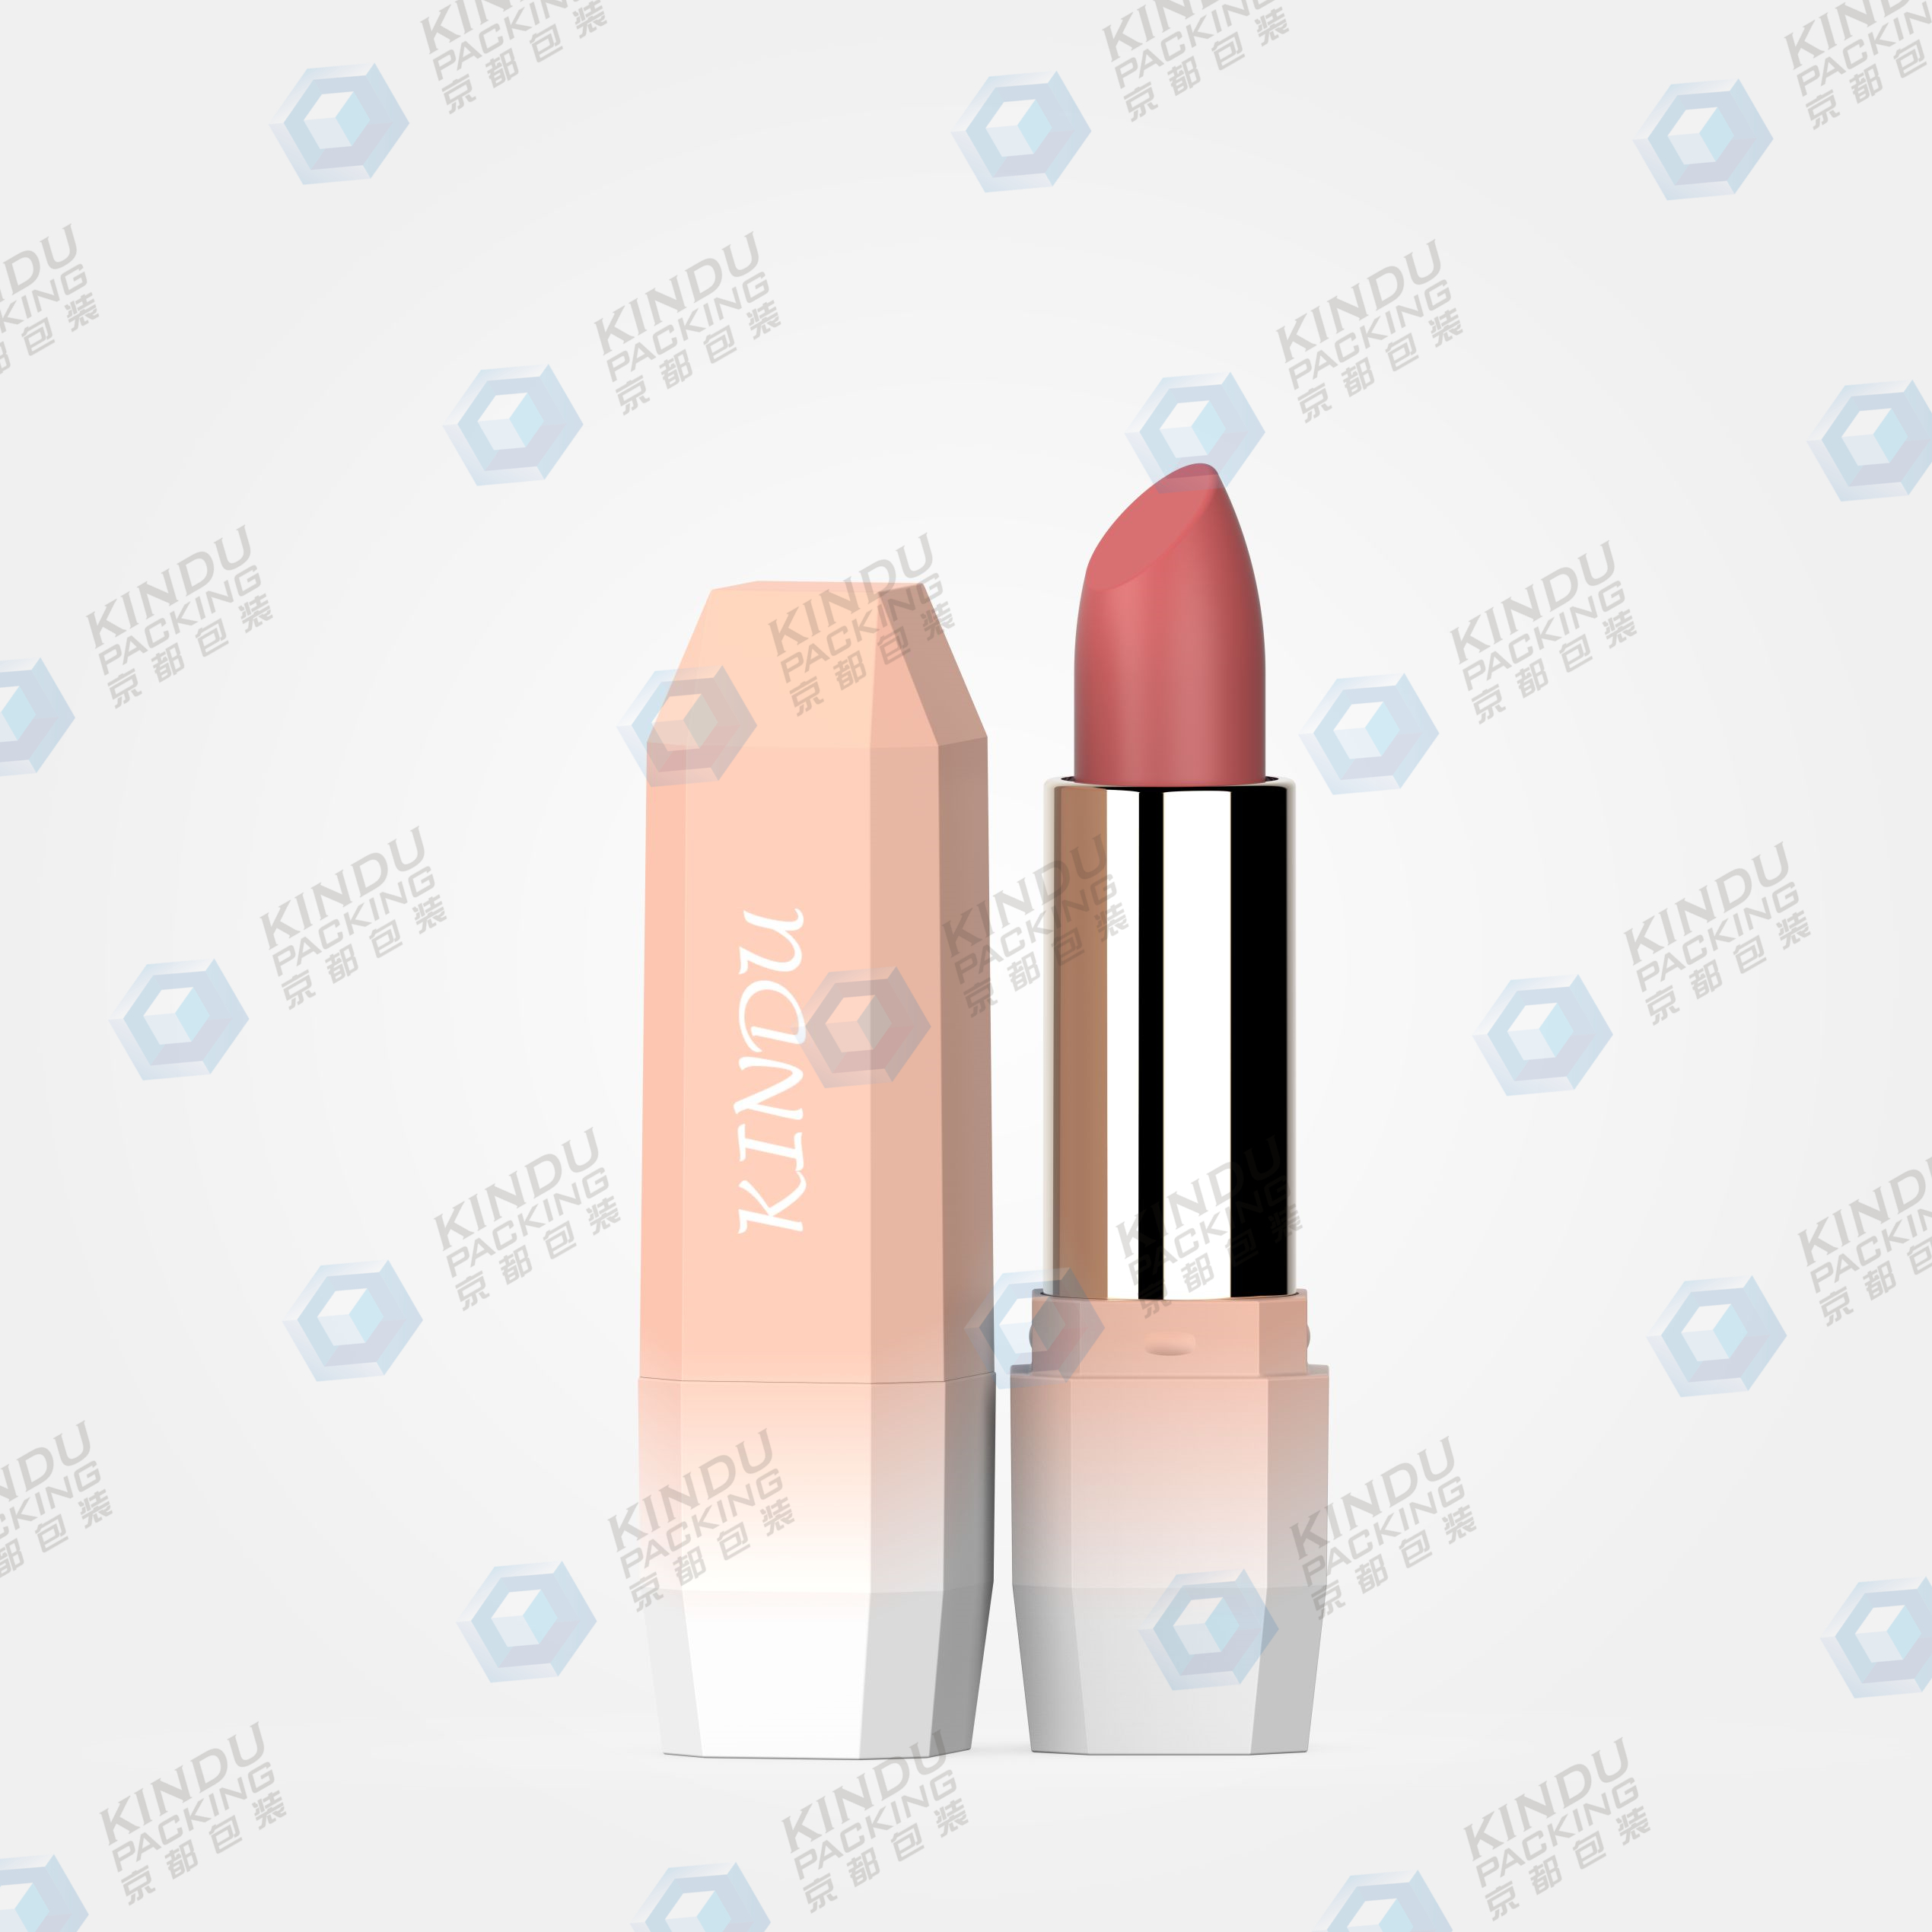 Lipstick packaging with a distinctive shape (ZH-K0062)